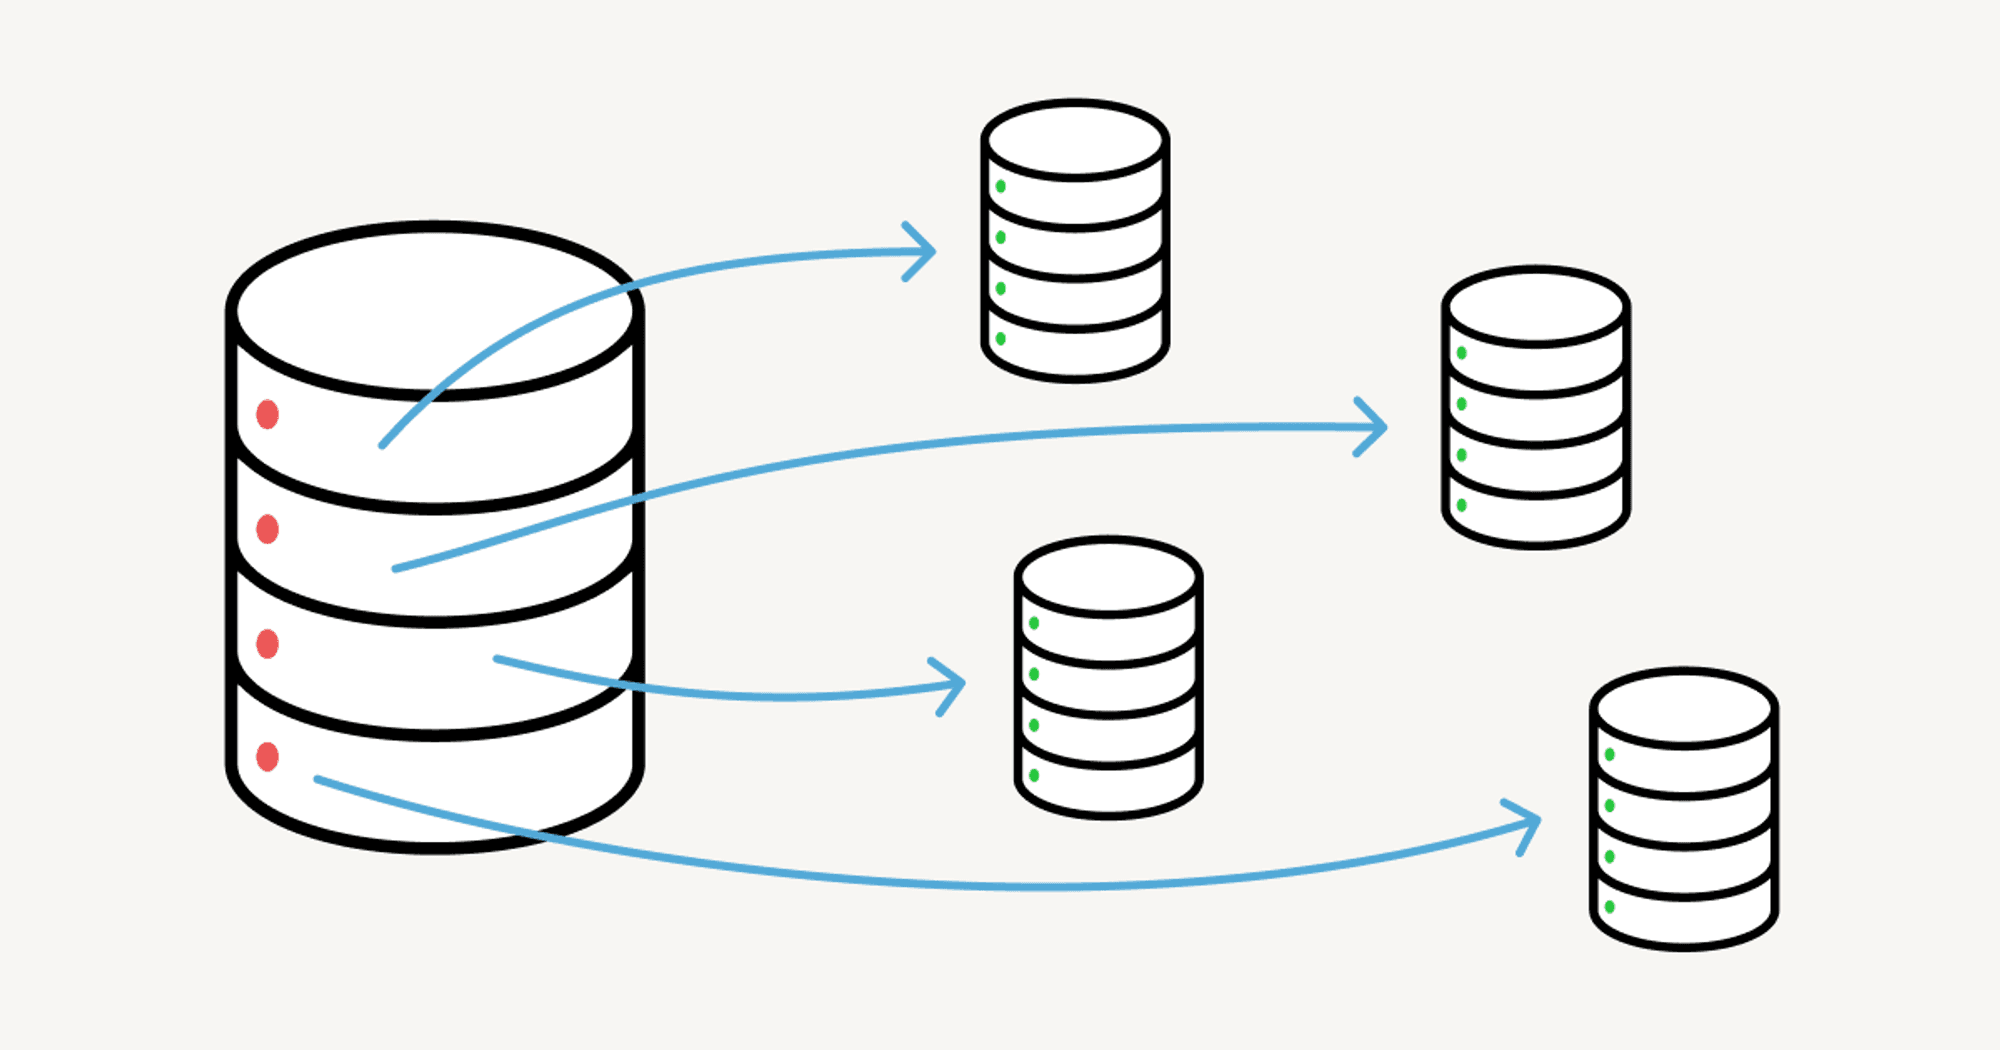 Herding elephants: lessons learned from sharding Postgres at Notion